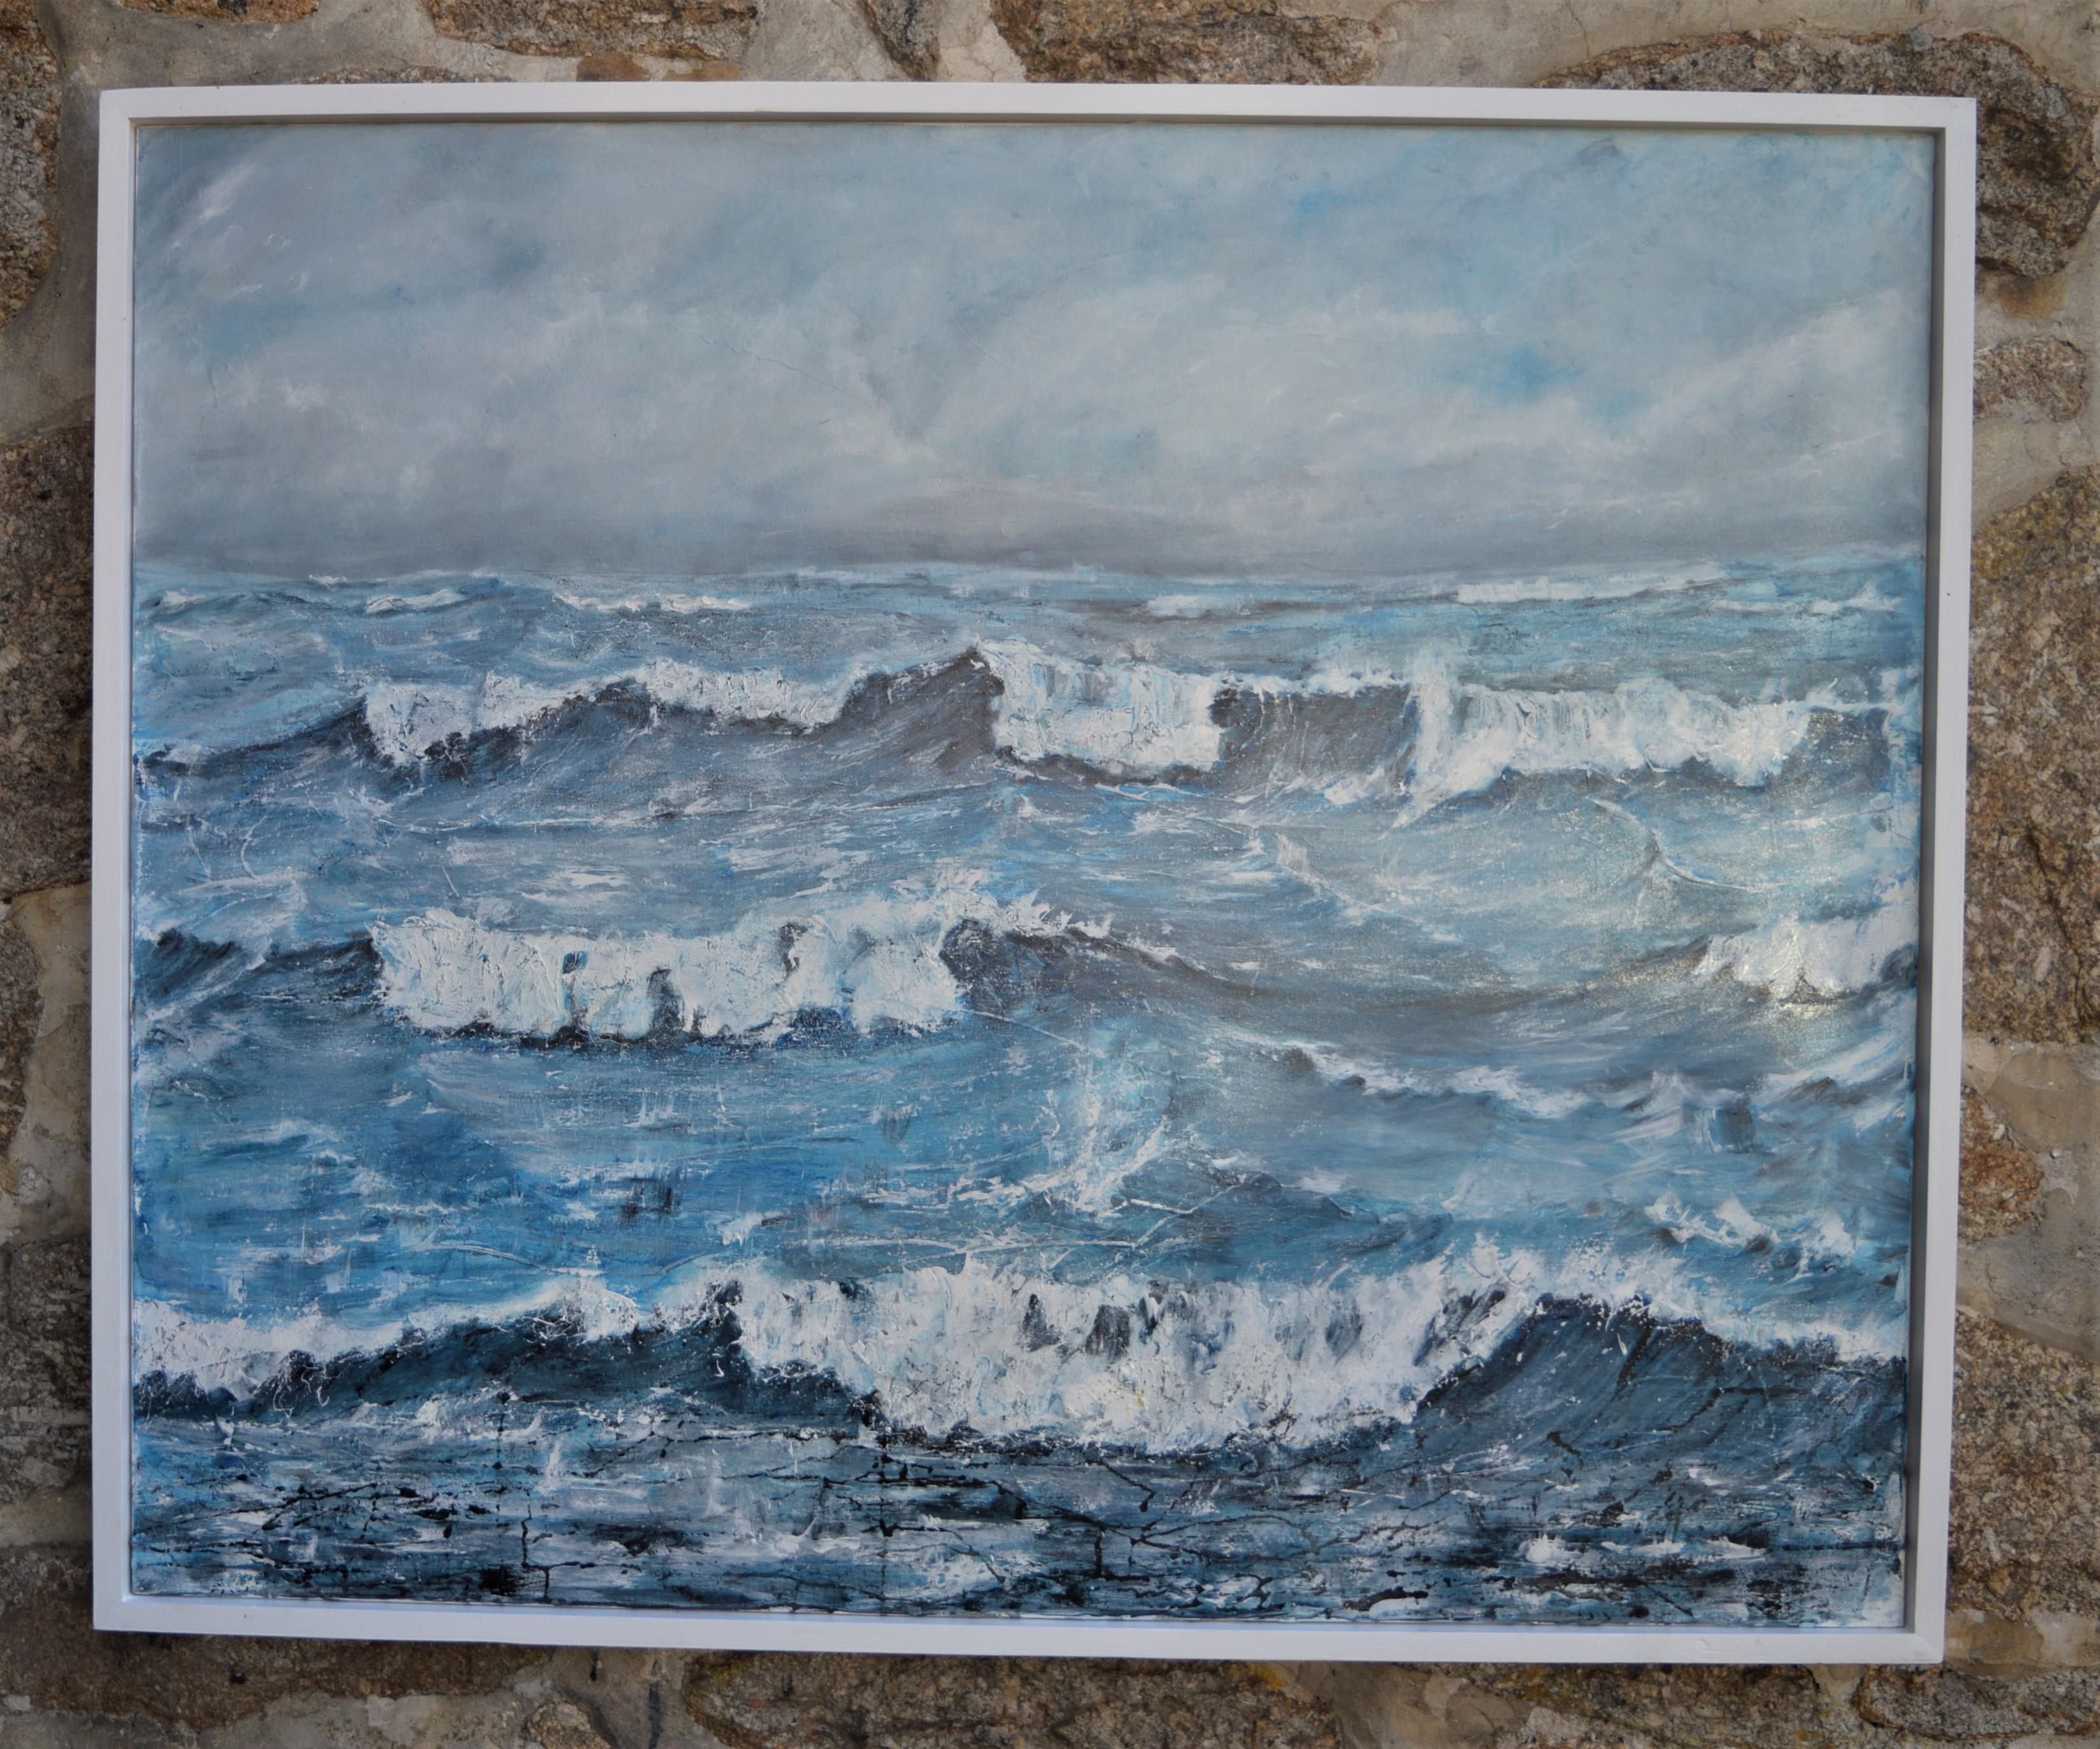 I Must Go Down to the Seas Again. Contemporary Sea Scape Oil Painting - Gray Landscape Painting by Penny Rumble